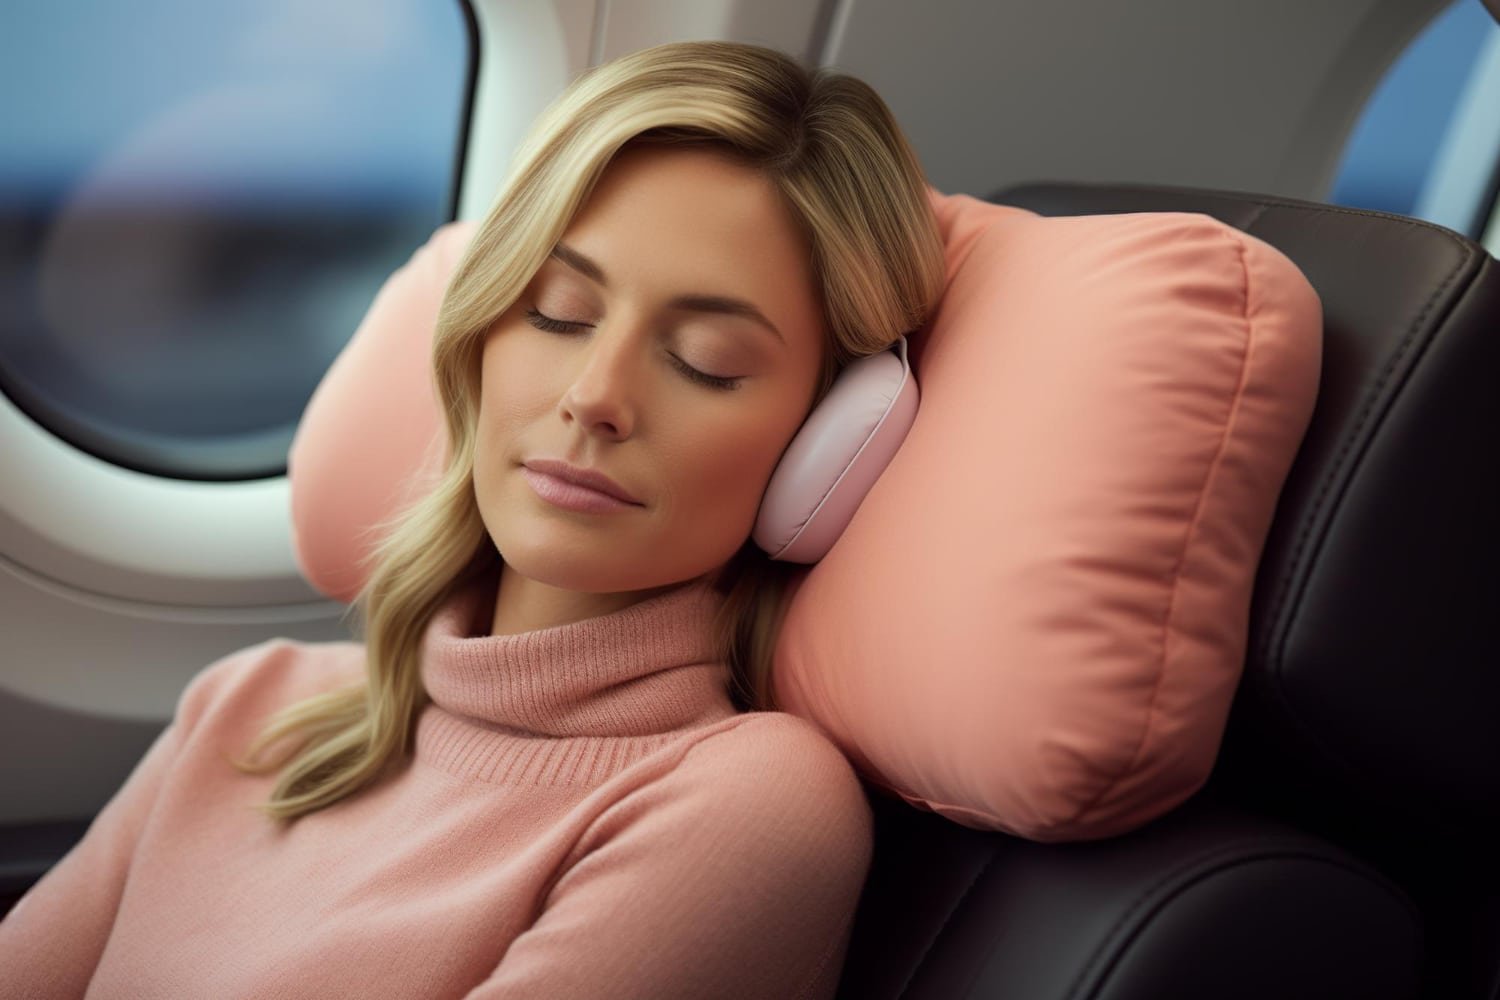 Travel Comfortably With Ostrichpillow’s Unique Travel Pillows